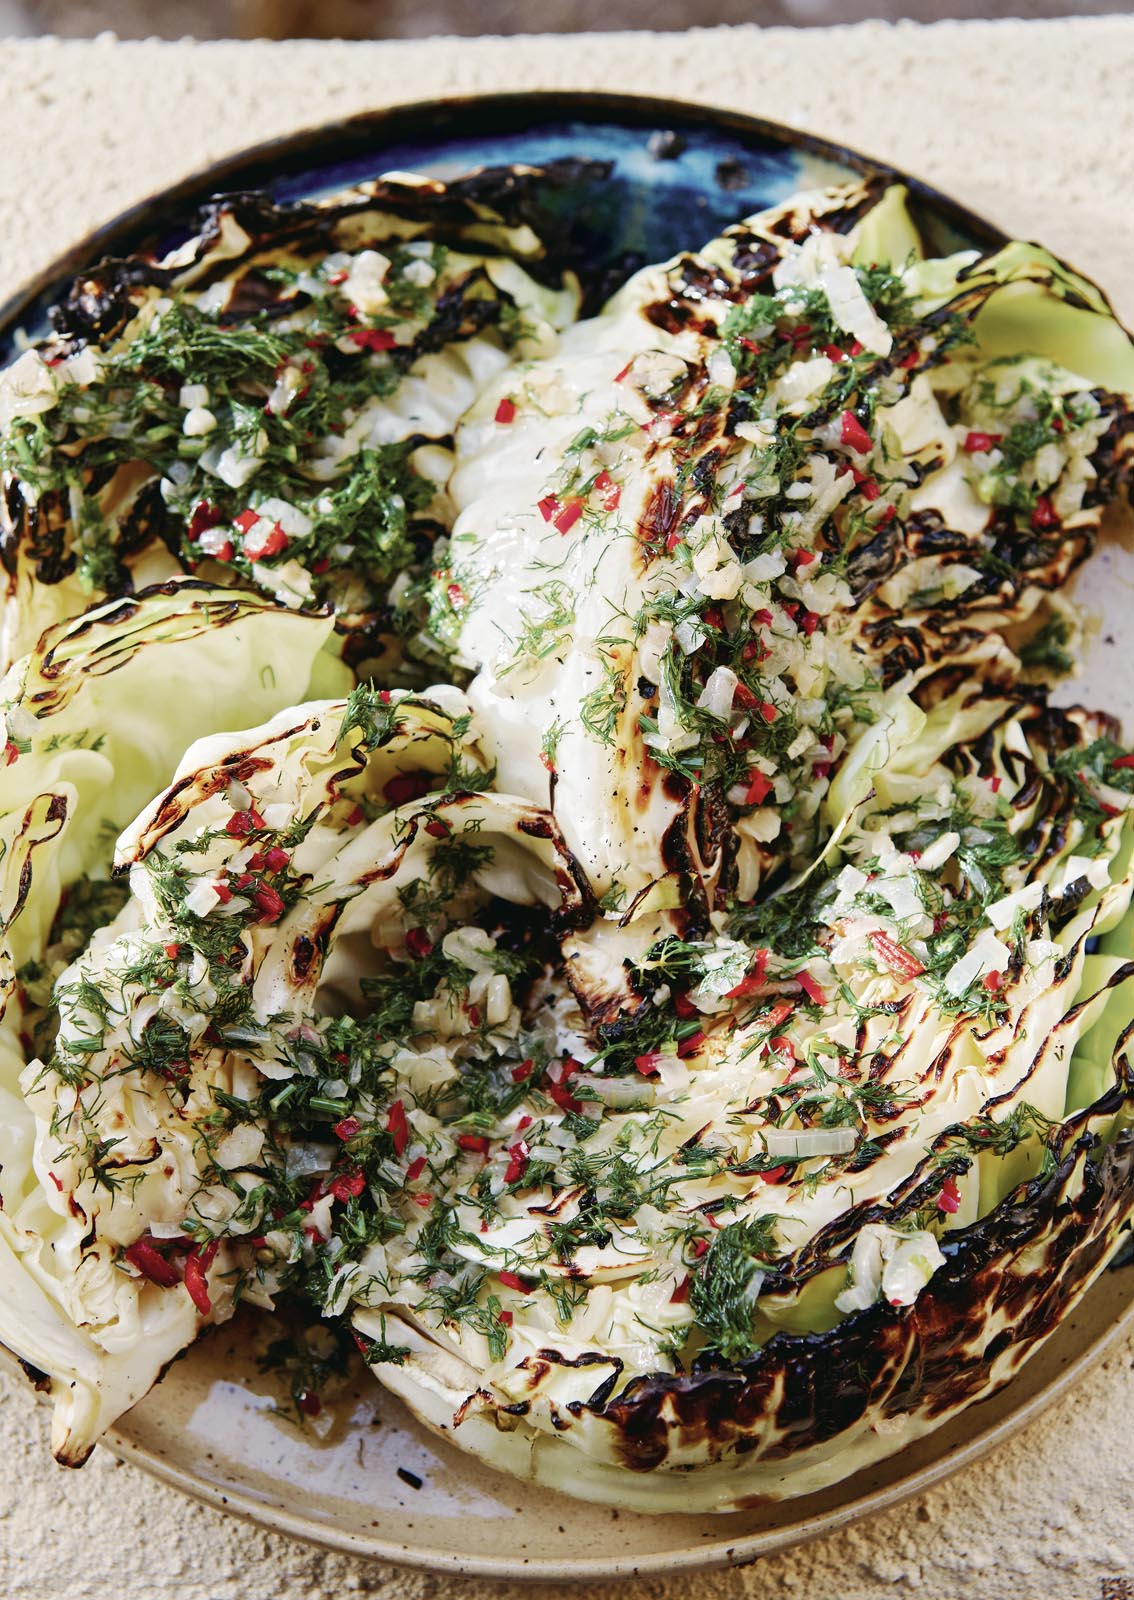 Grilled Cabbage with Chilli Garlic Butter